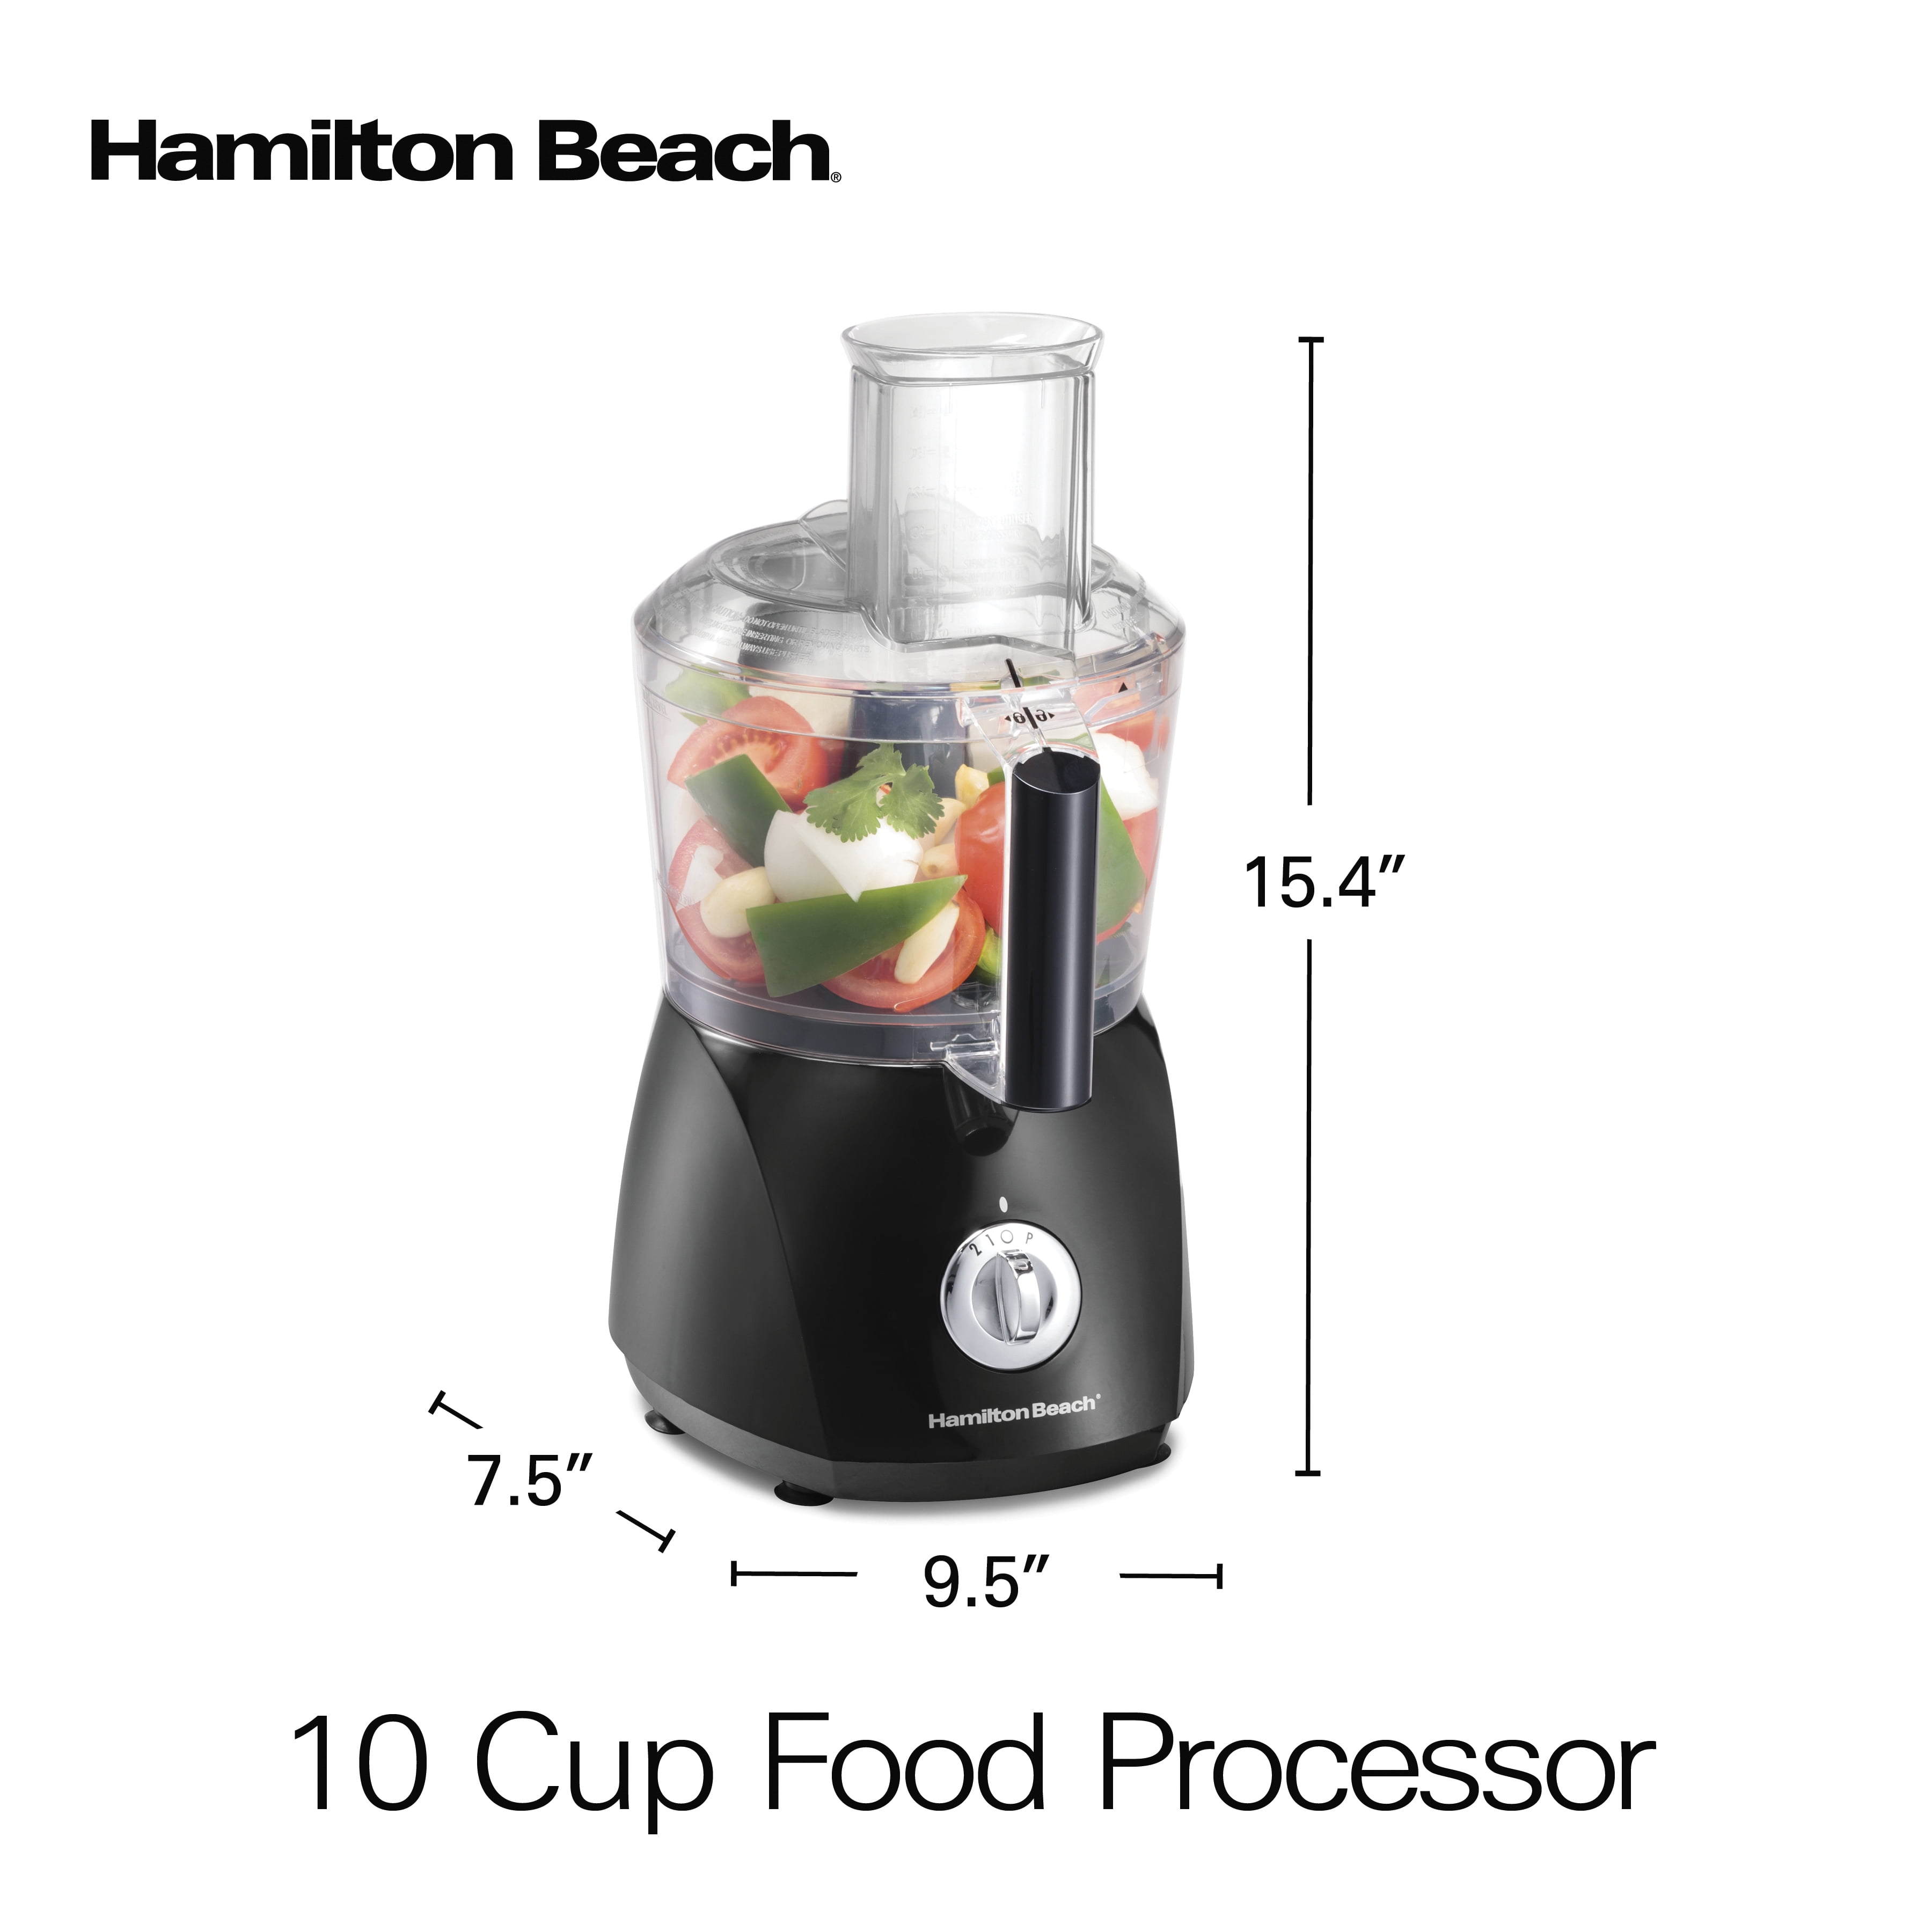 New and Never Used Hamilton Beach Prep Star Food Processor Model No 70560R-8  cup